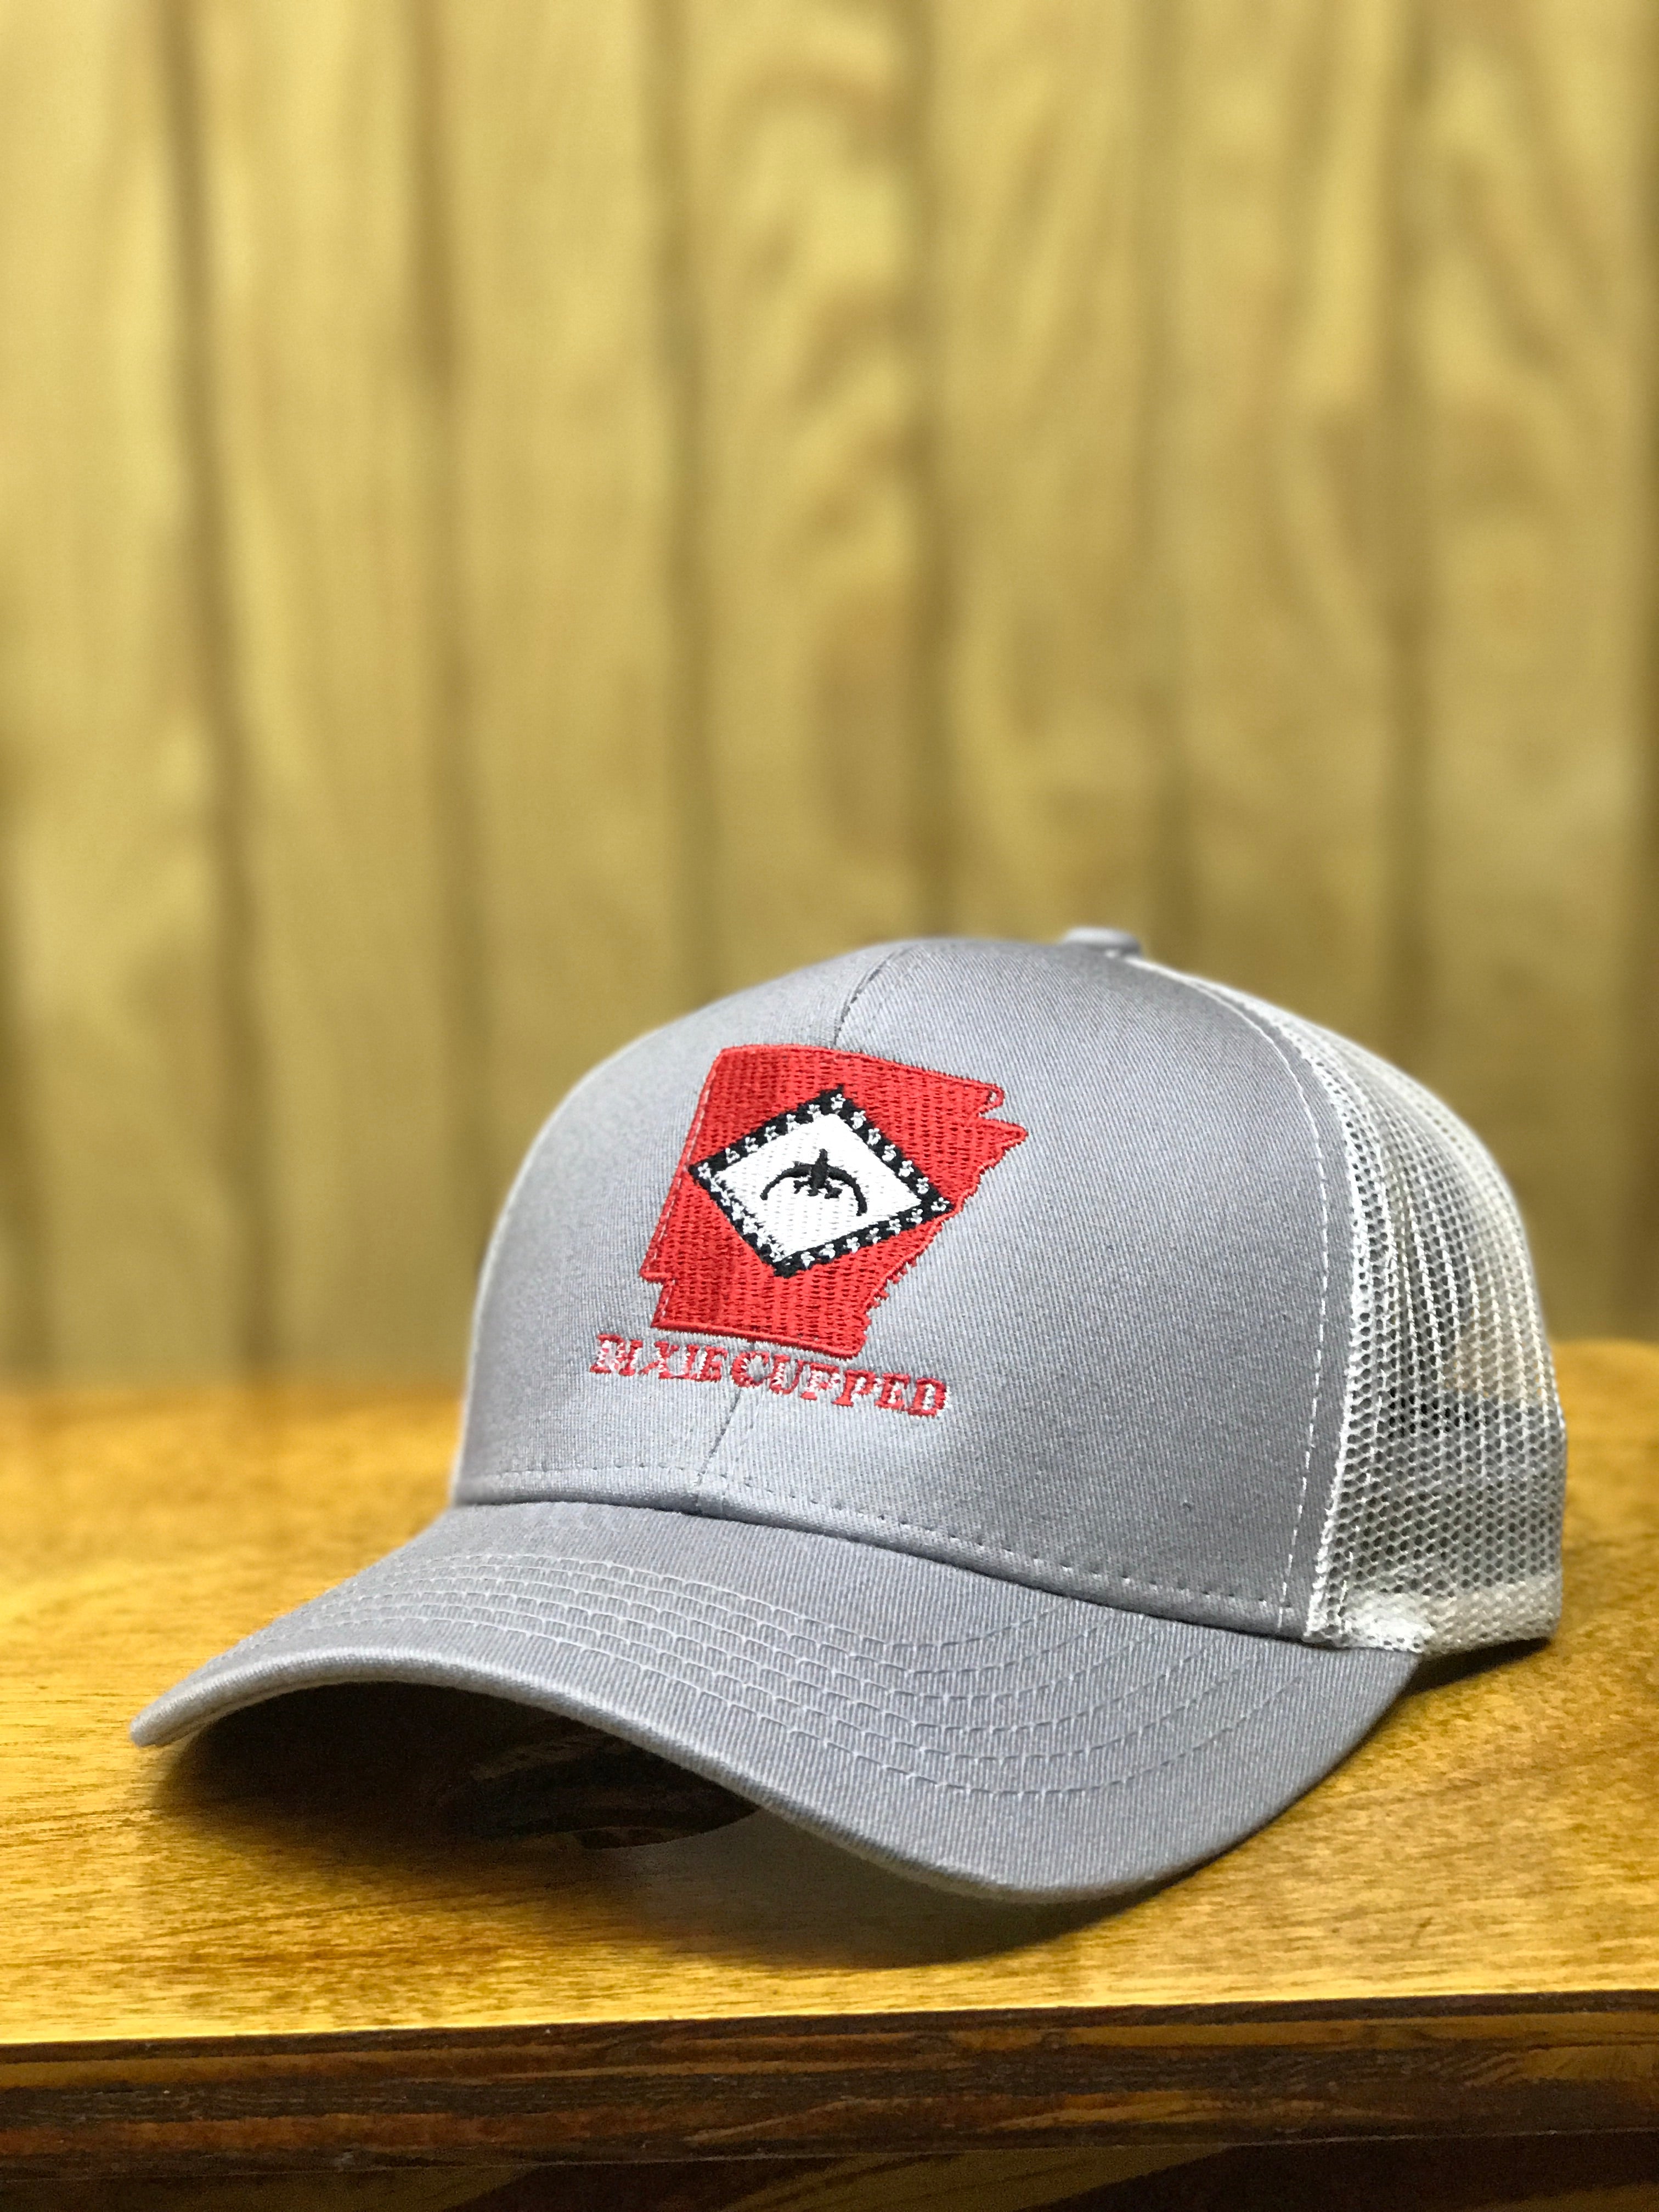 Dixie Cupped - Arkansas Light Gray w/White Mesh Structured Cap